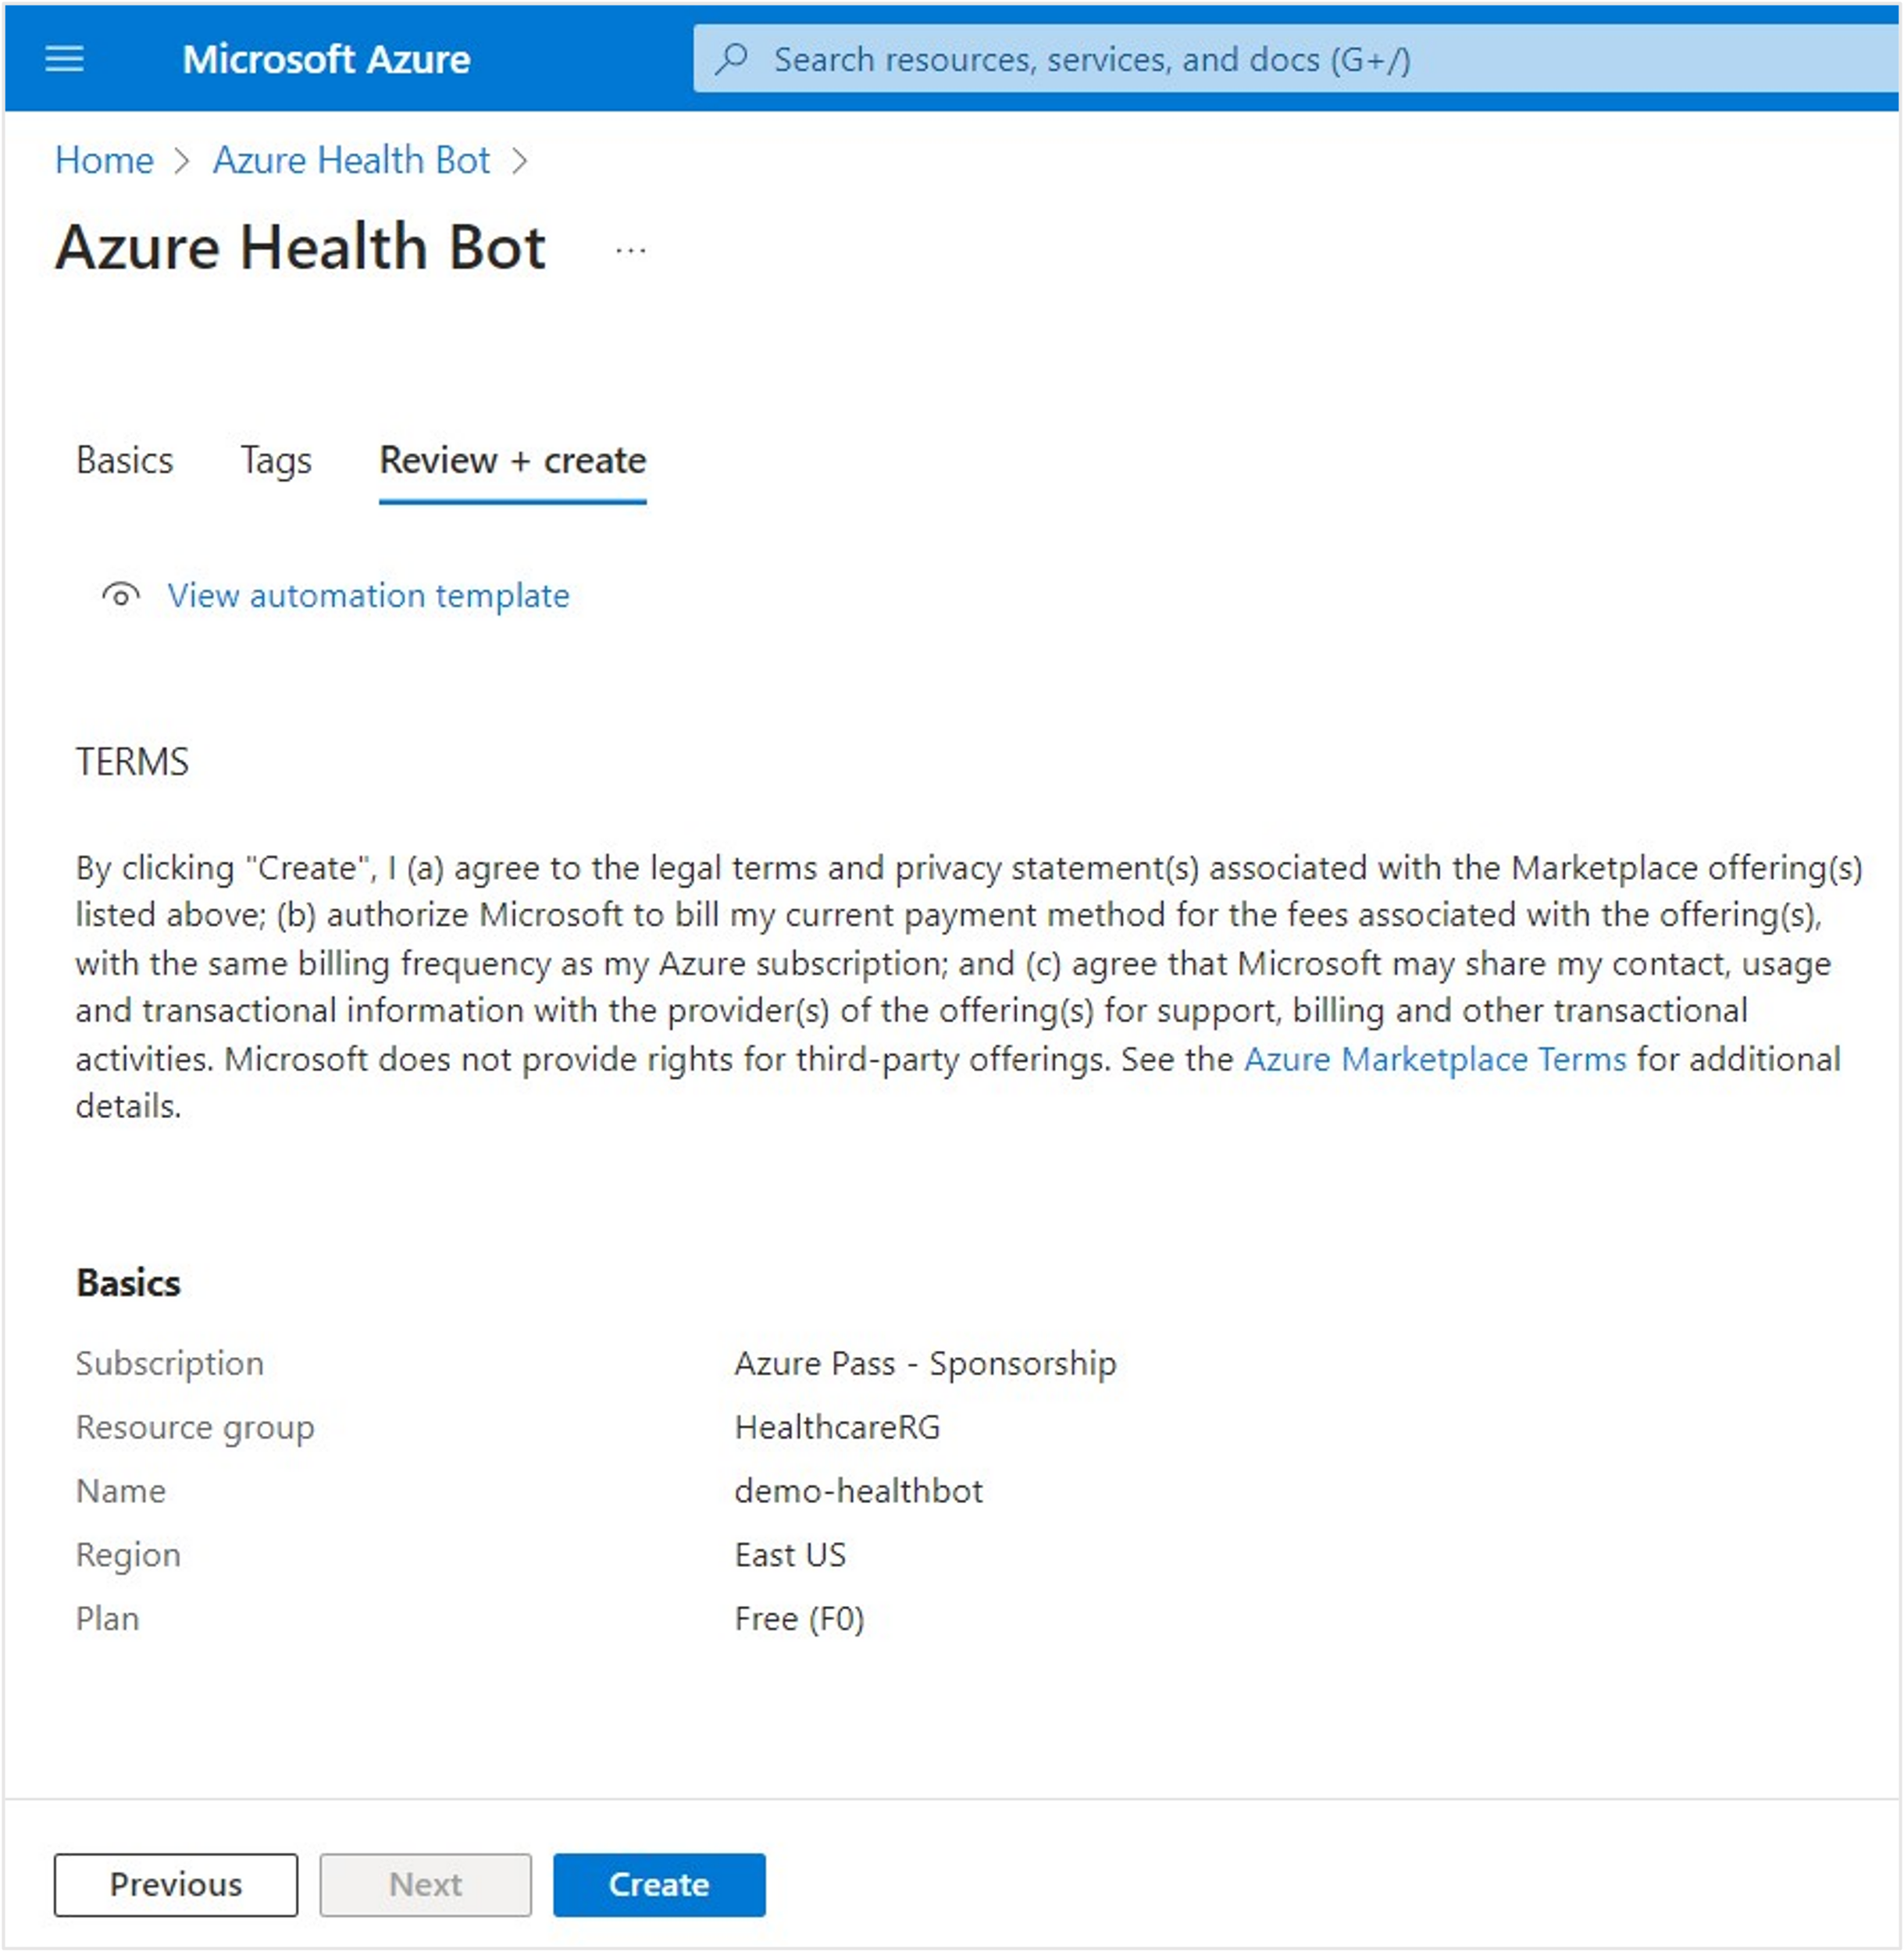 Screenshot of the Azure Health Bot review and create terms and create button.